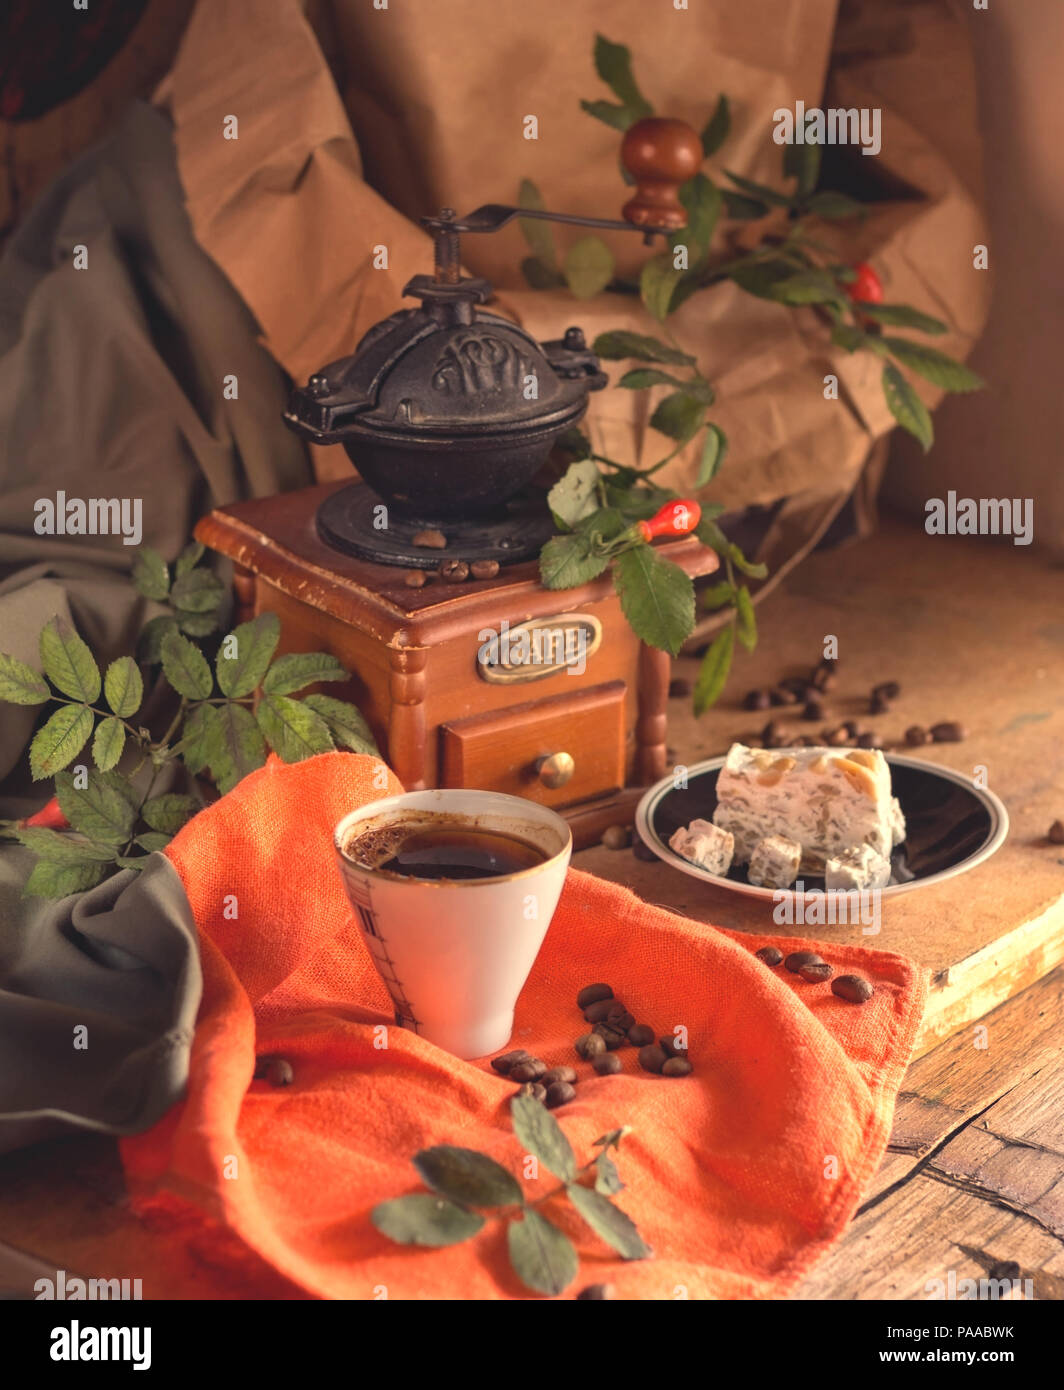 cup of coffee, sweets and grains of coffee on a wooden table Stock Photo